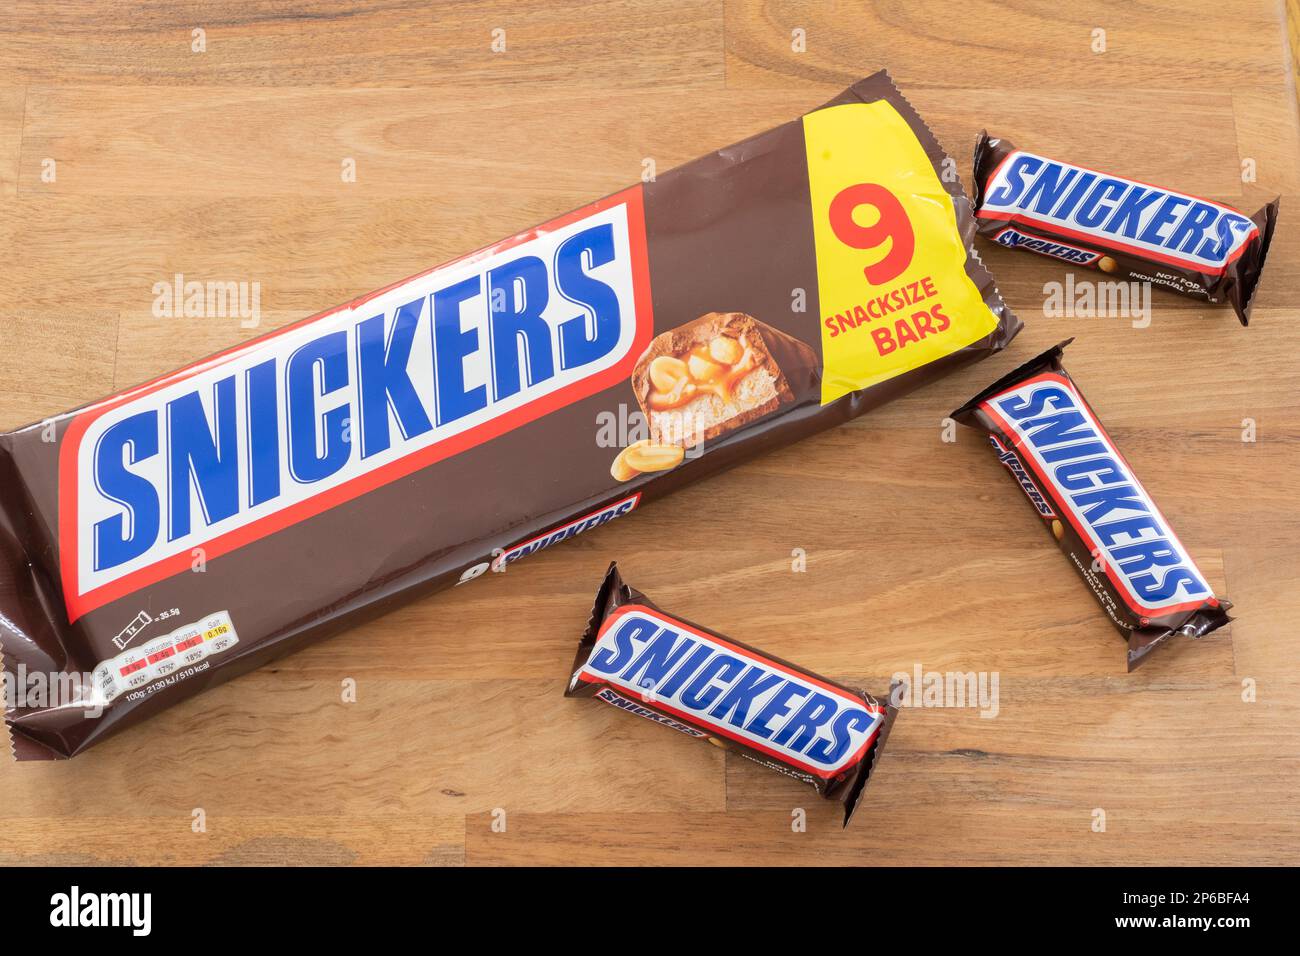 Snickers bars and a snickers packet. Snickers is owned by Mars, Incorporated. Theme: snacking, snack food, unhealthy eating, chocolate bar industry Stock Photo